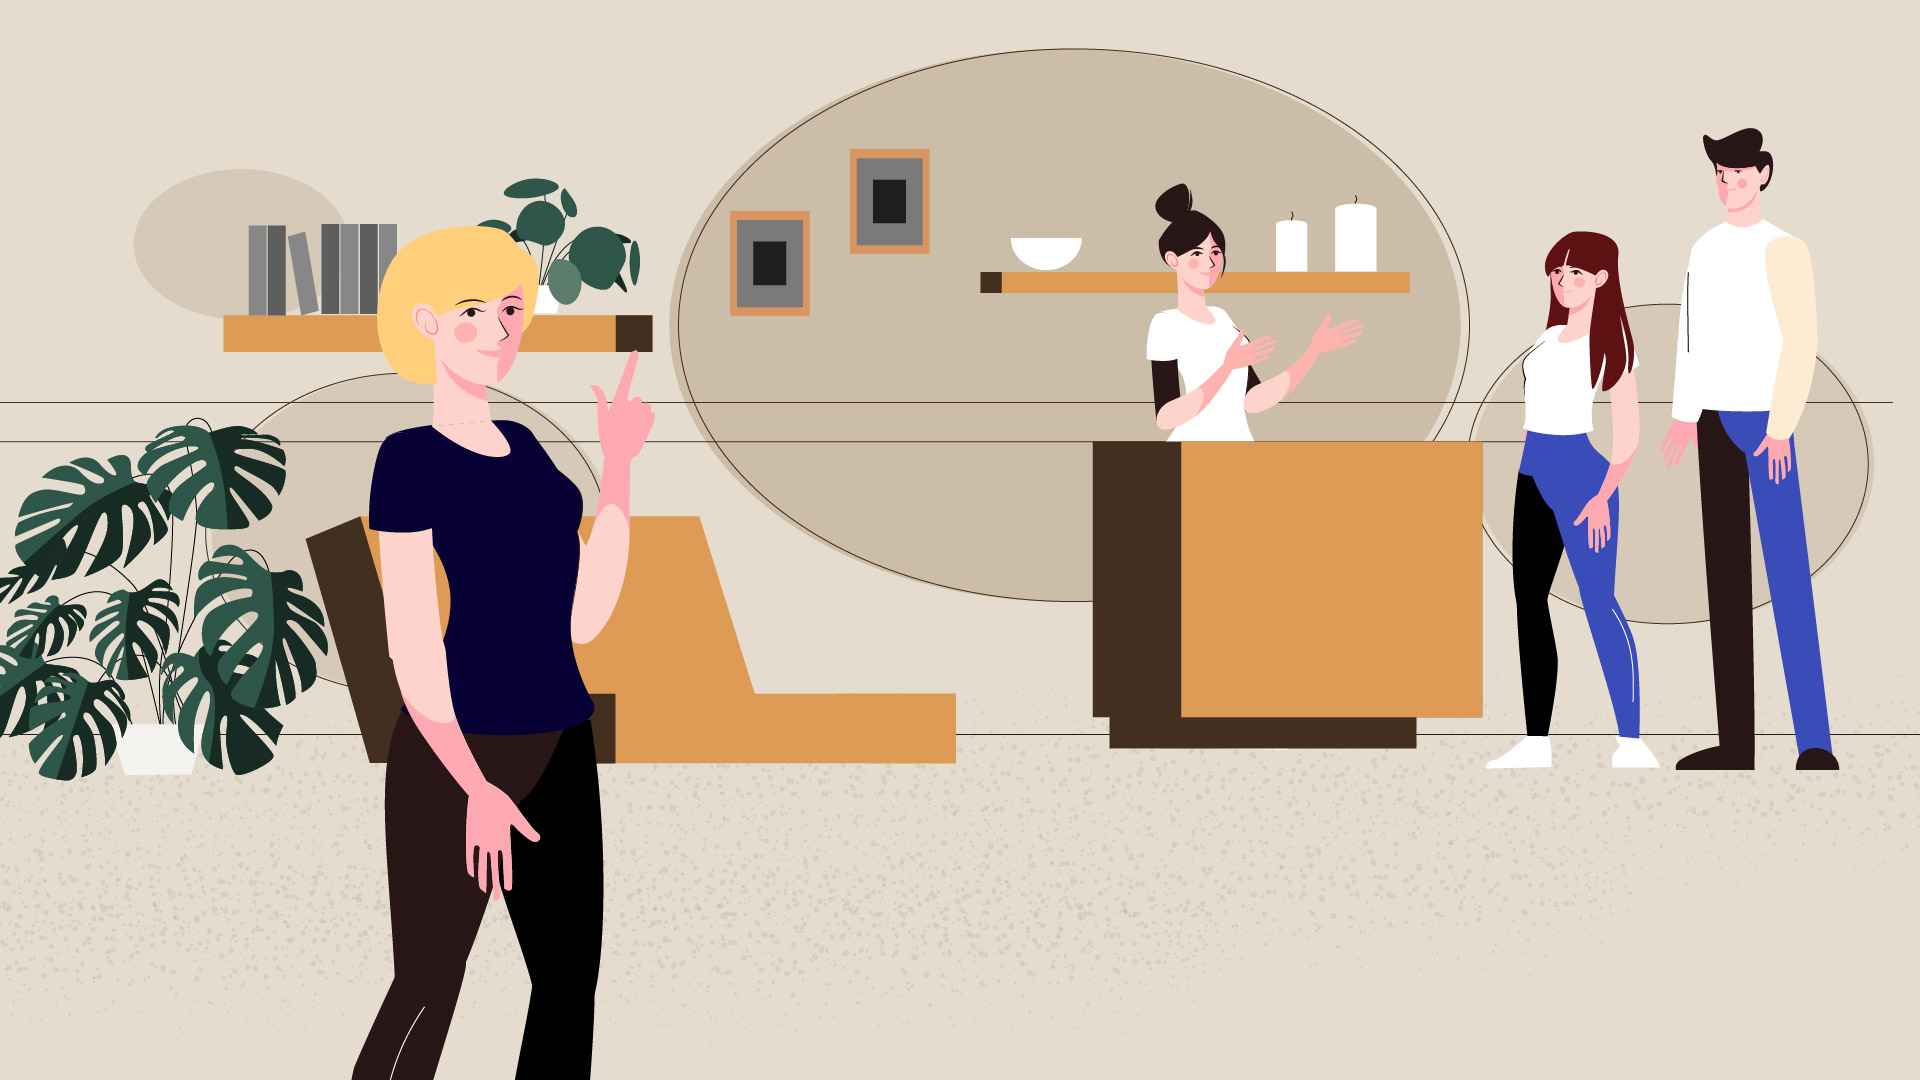 Animated Video for a startup "INTOKU Center"